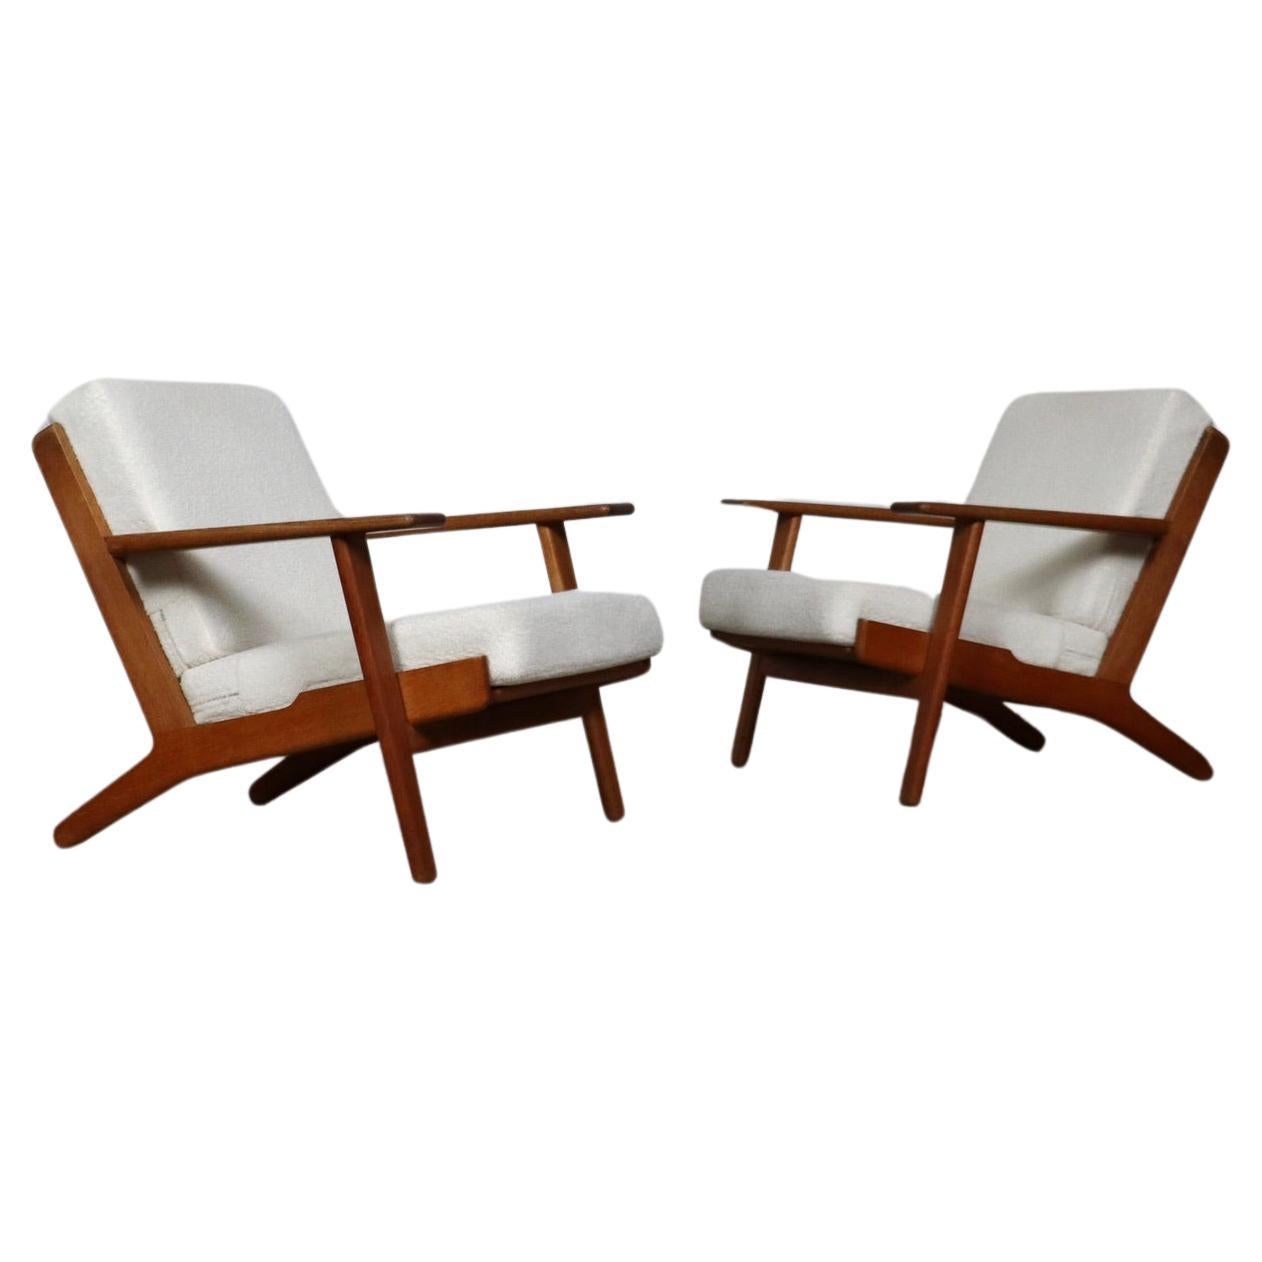 Pair Of GE290 Armchairs In Bouclé By Hans Wegner For Getama, Denmark, 1950s For Sale